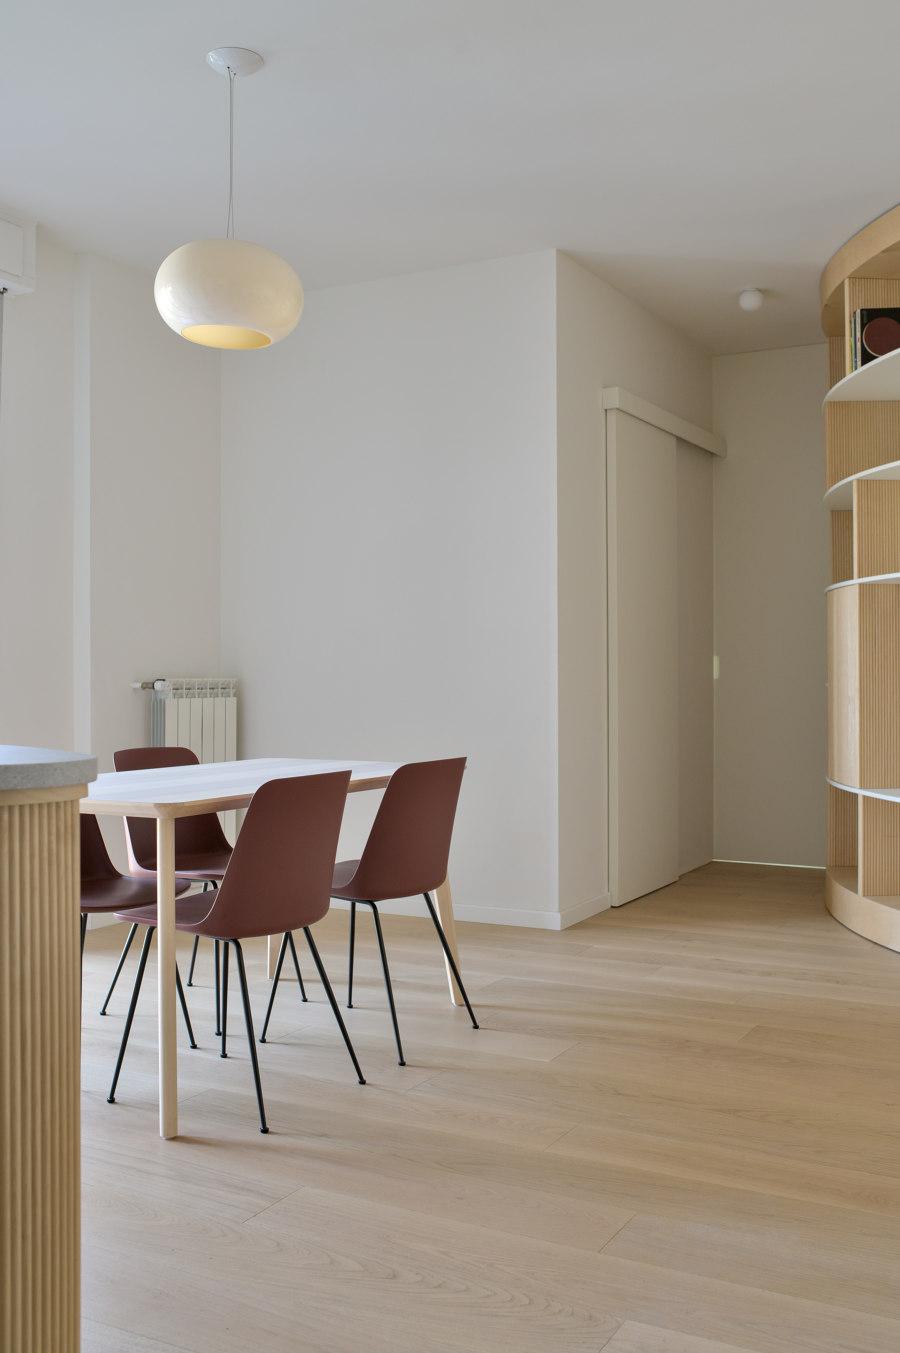 Apartment with a Library | Pièces d'habitation | Olbos Studio